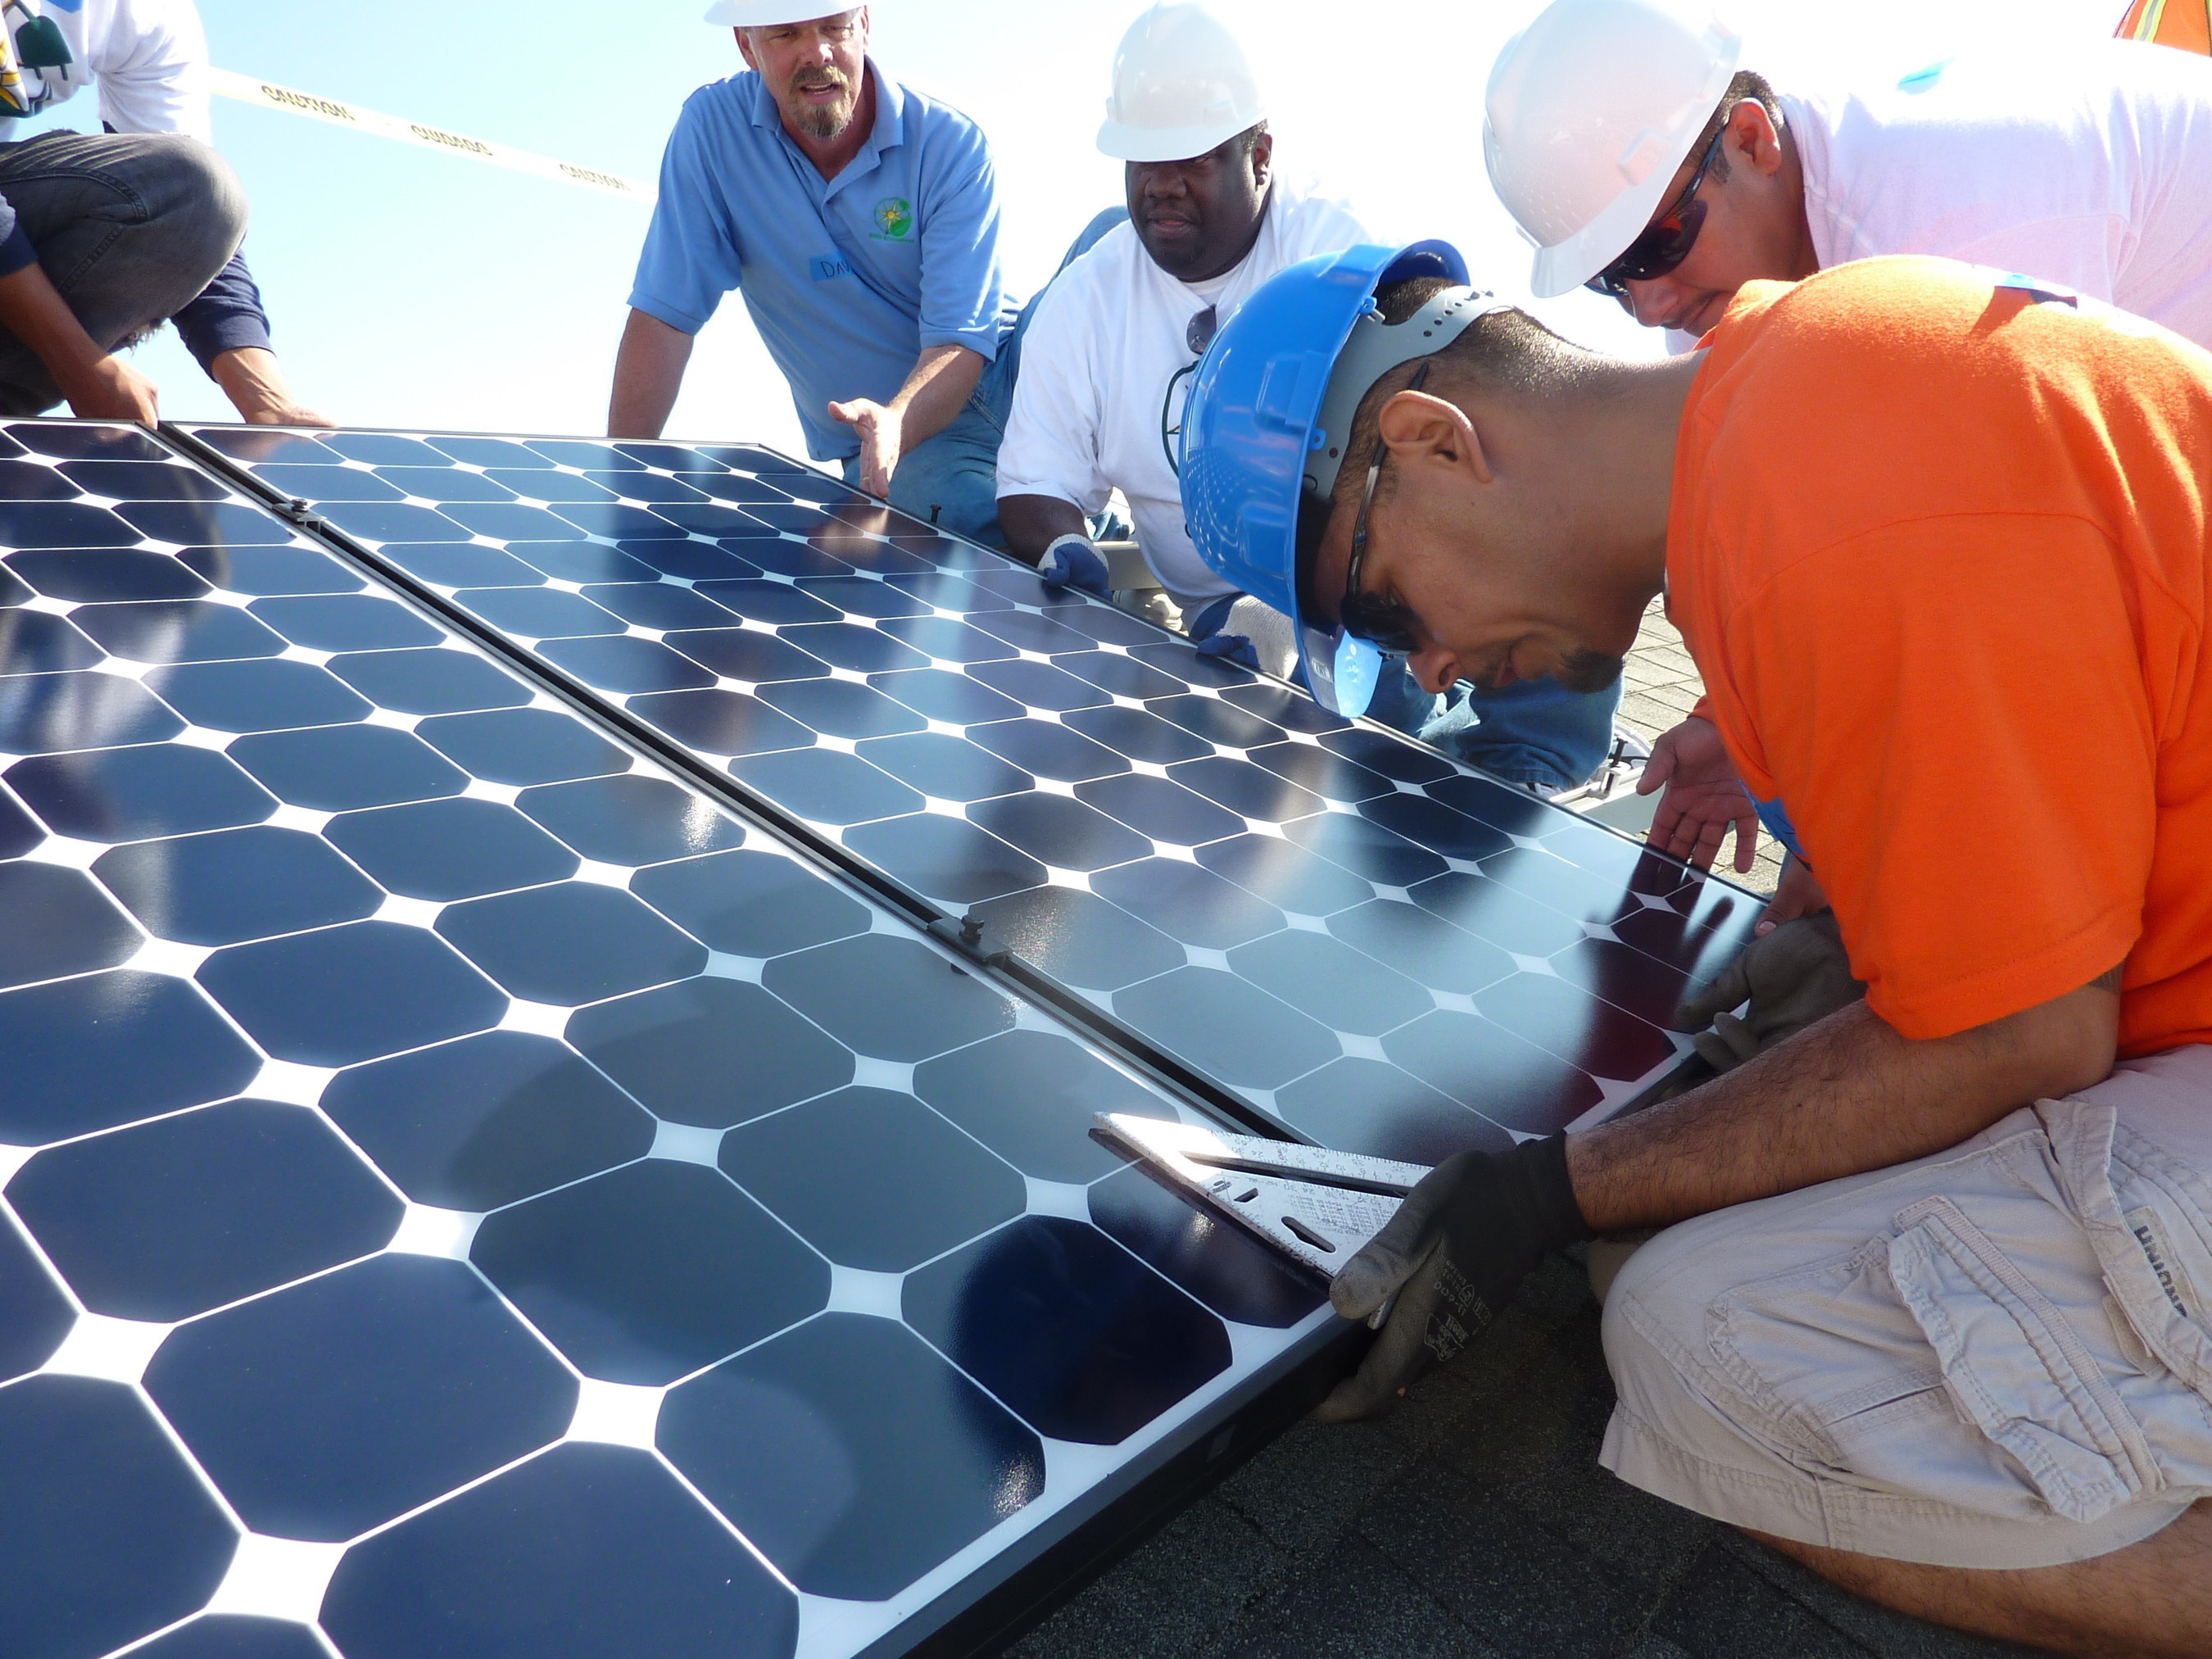 SunEdison and GRID Alternatives announce major solar workforce initiative called RISE. SunEdison and the SunEdison Foundation contribute $5 million to train women and members of underserved communities for jobs in the solar industry.